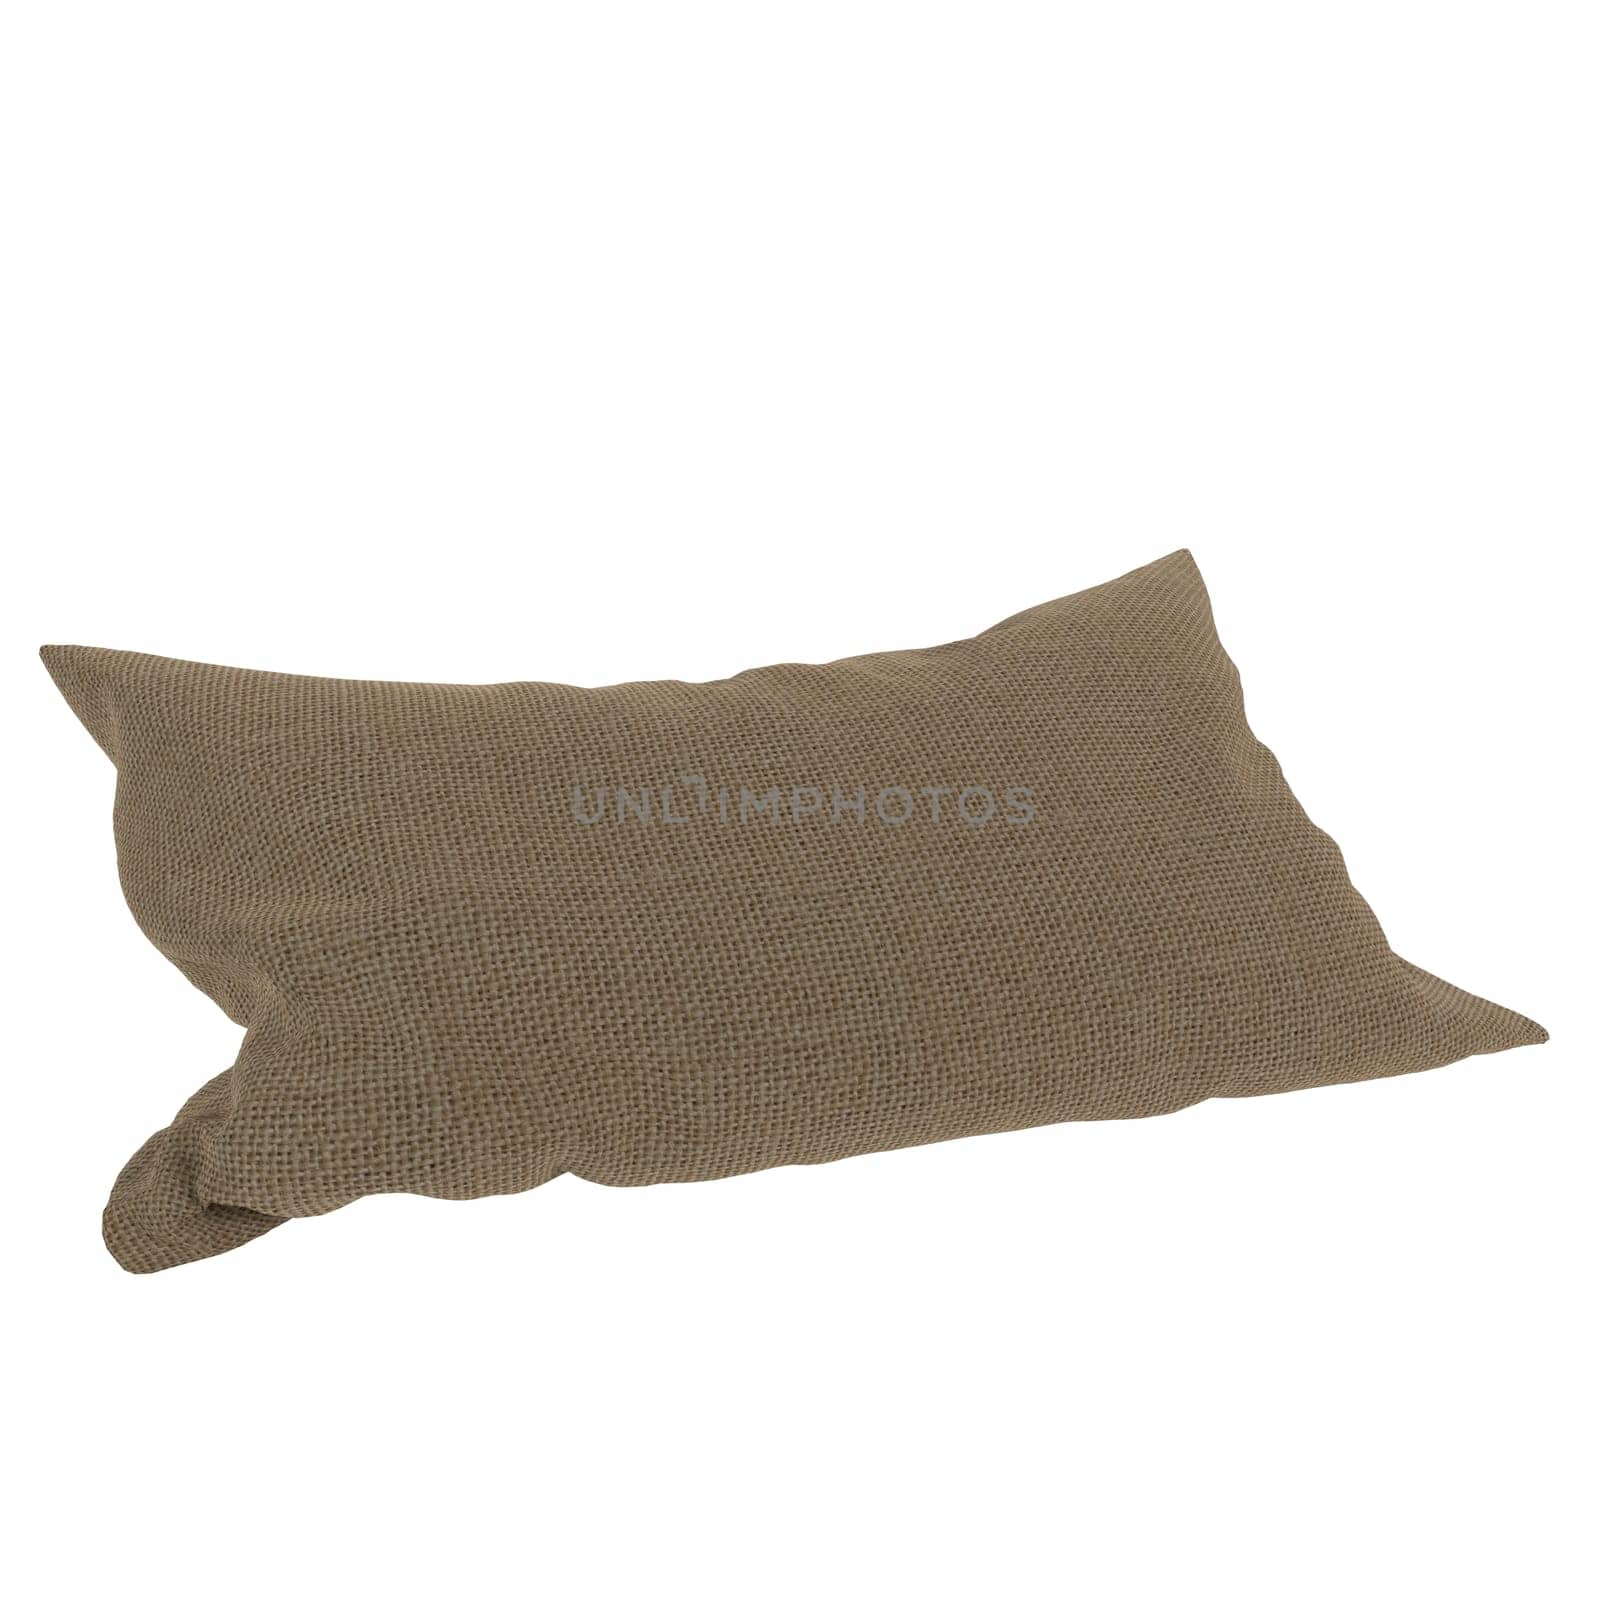 Pillow isolated on white background. High quality 3d illustration